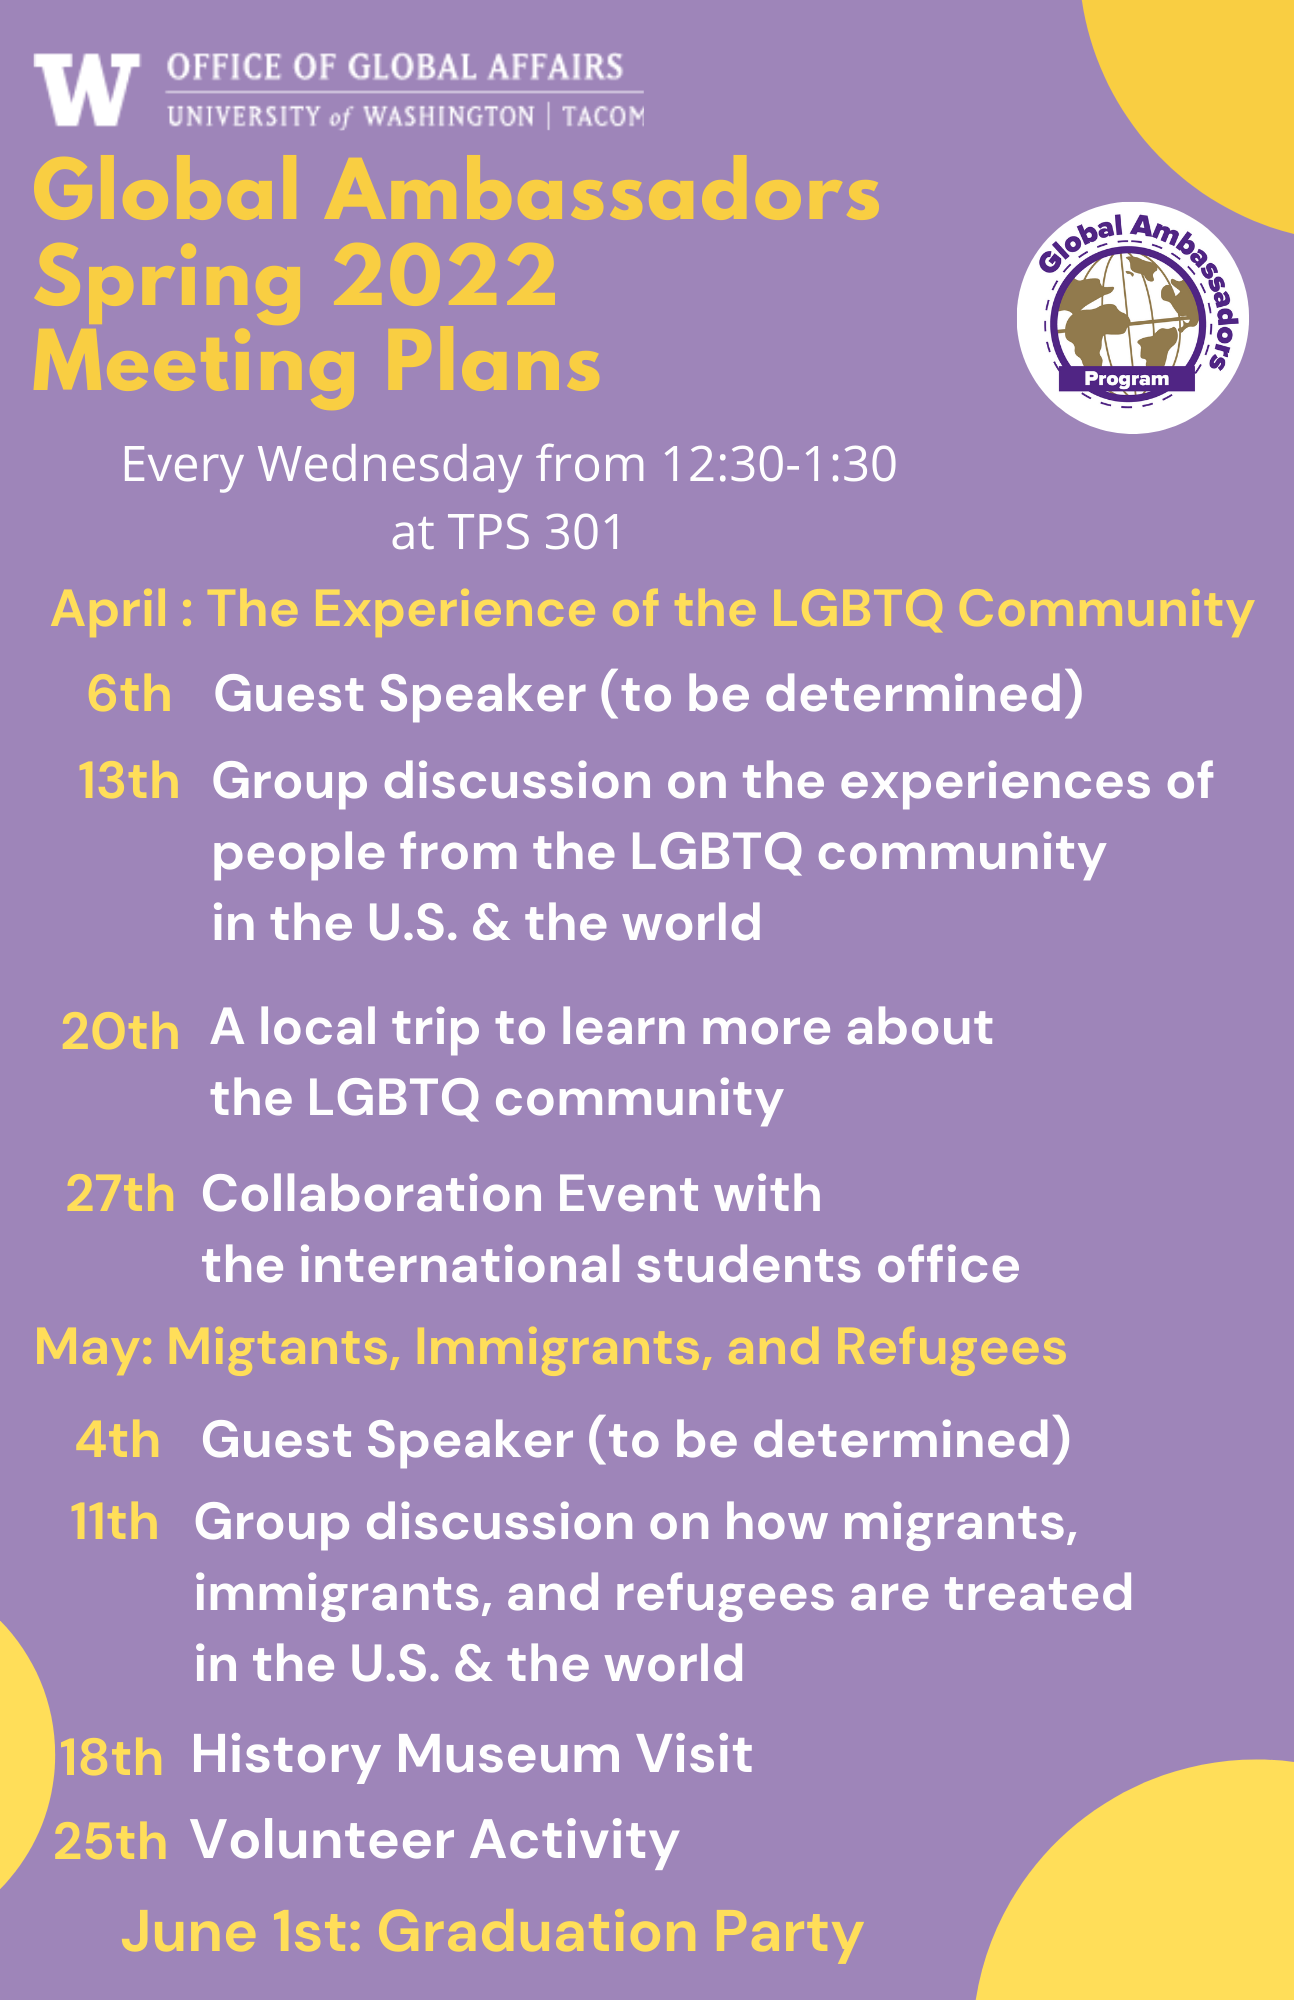 Global Ambassadors Spring 2022 Meeting Plans. April: LGBTQ, 6th: Guest Speaker, 13th: Group Discussion, 20th: Local Trip, and 27th: Collaboration Event with the ISSS office. May: Migrants, Immigrants, and Refugees, 4th: Guest Speaker, 11th: Group Discussion, 18th: History Museum Visit, and 25th: Volunteer activity. June 1st: Graduation Party 